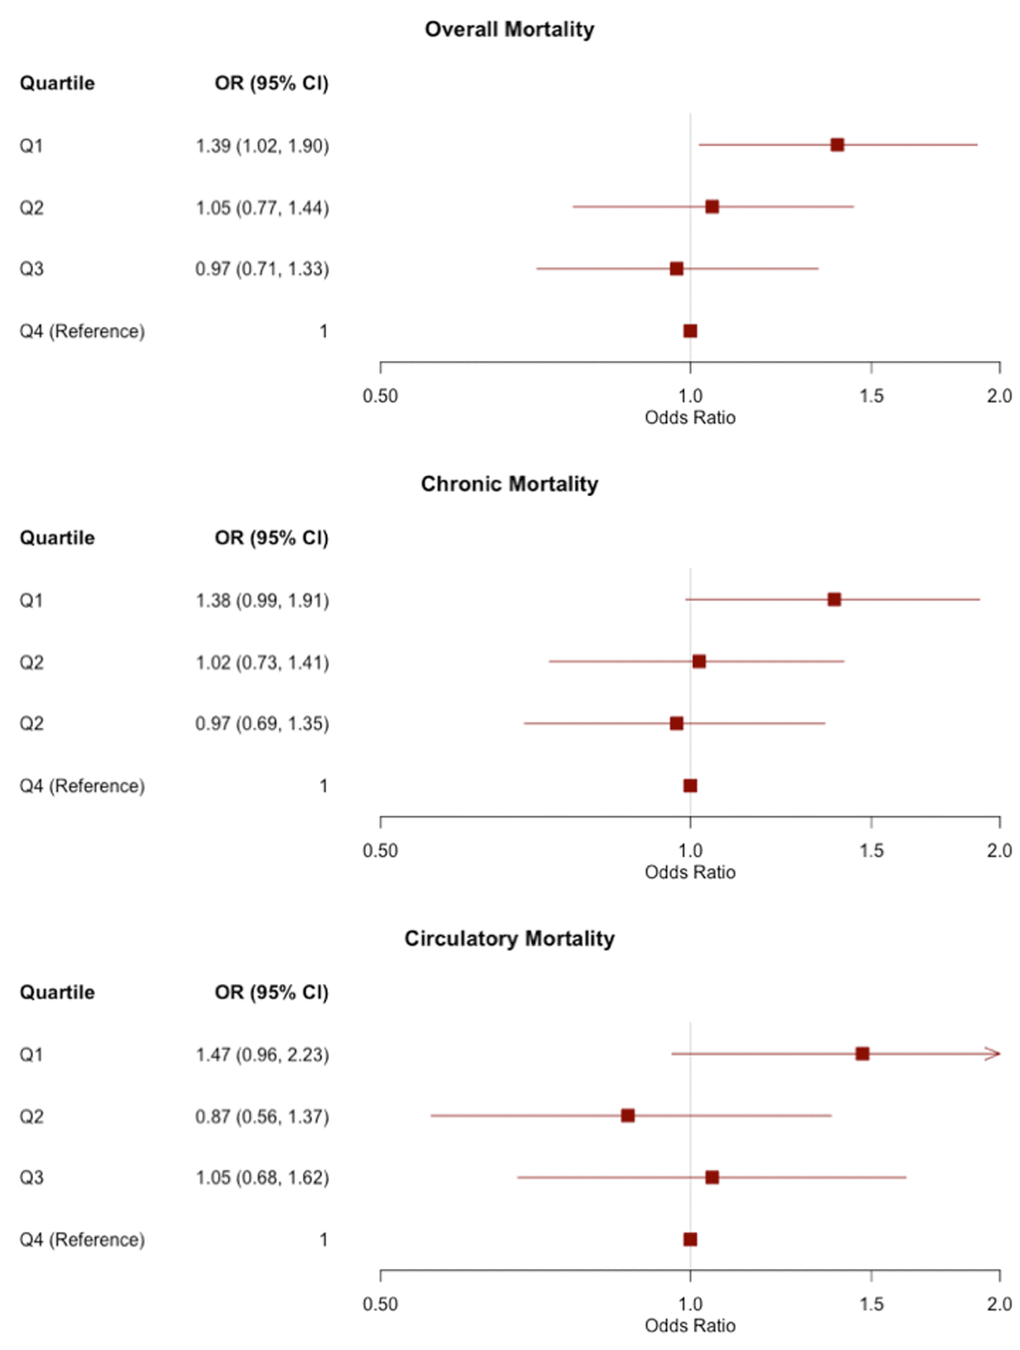 Odds ratios (ORs) and 95% confidence intervals for the association between TL quartiles and mortality outcomes in pooled analyses of all three cohorts. TL is divided into quartiles based on the distribution in controls. The reference group is the longest quartile of TL. The OR corresponding to each quartile compares the odds of mortality of the given quartile to the odds of mortality in the longest quartile. 